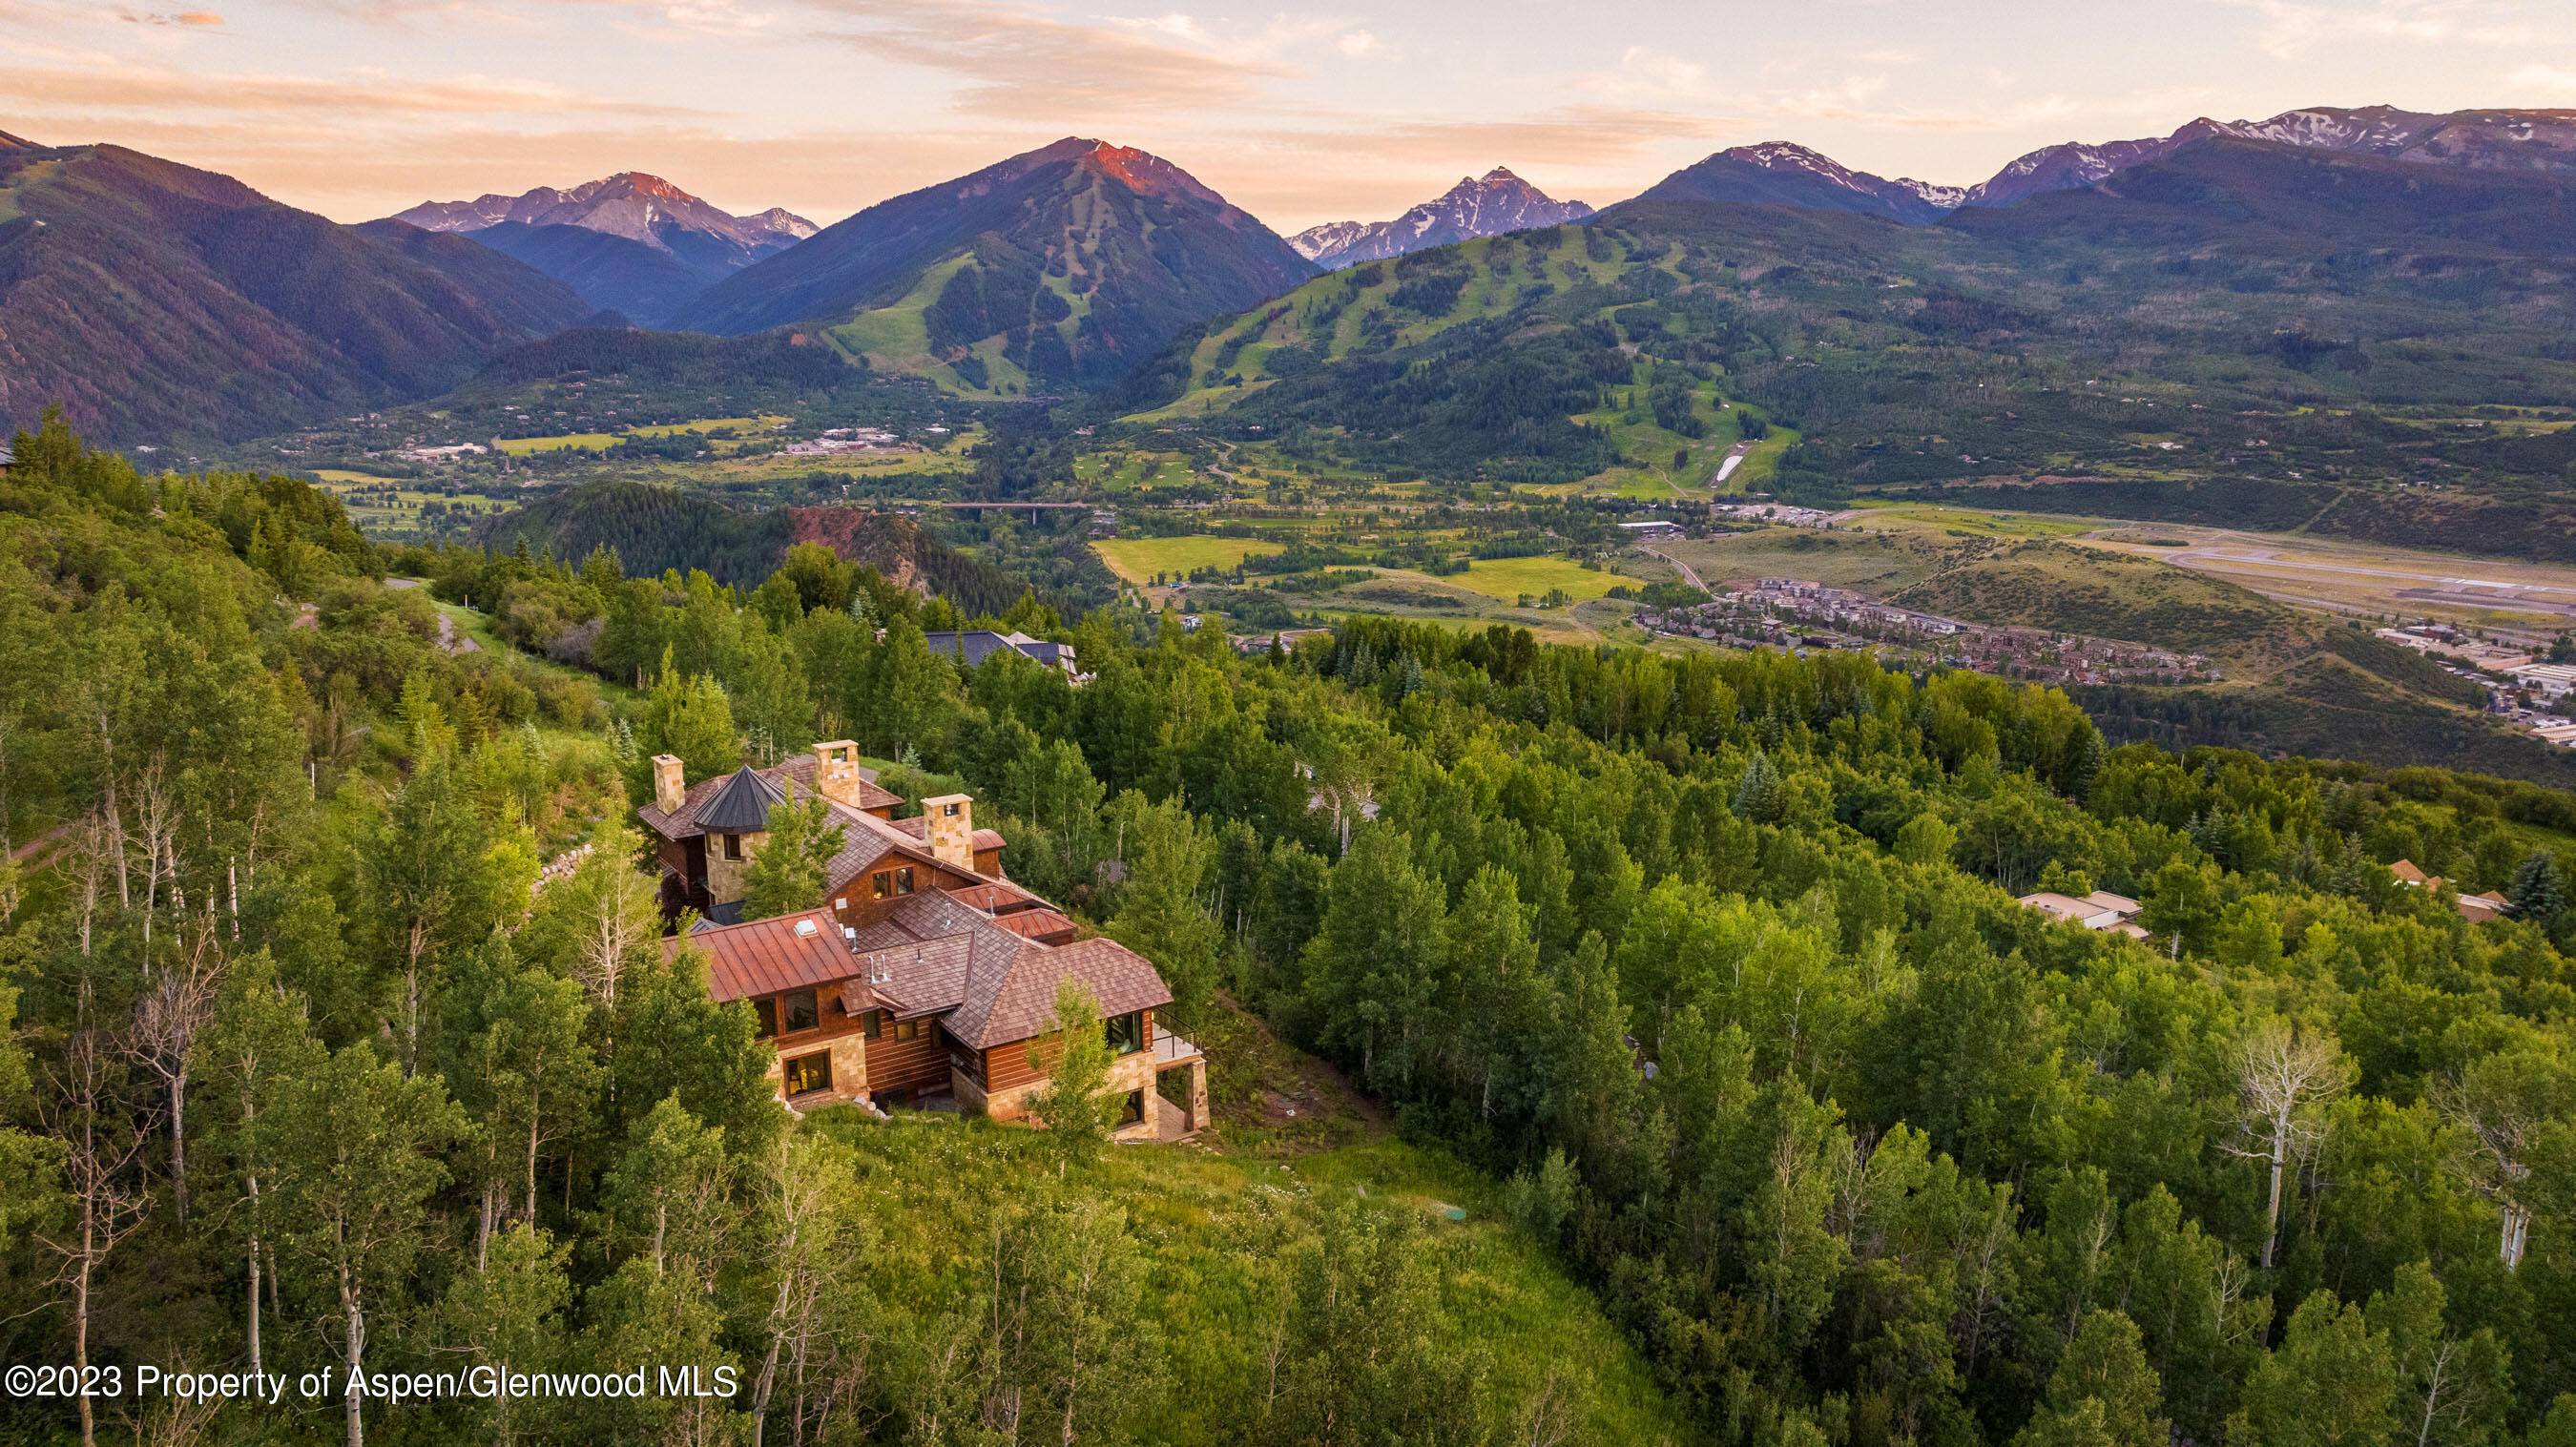 Starwood above Aspen is known for its incredible vistas.